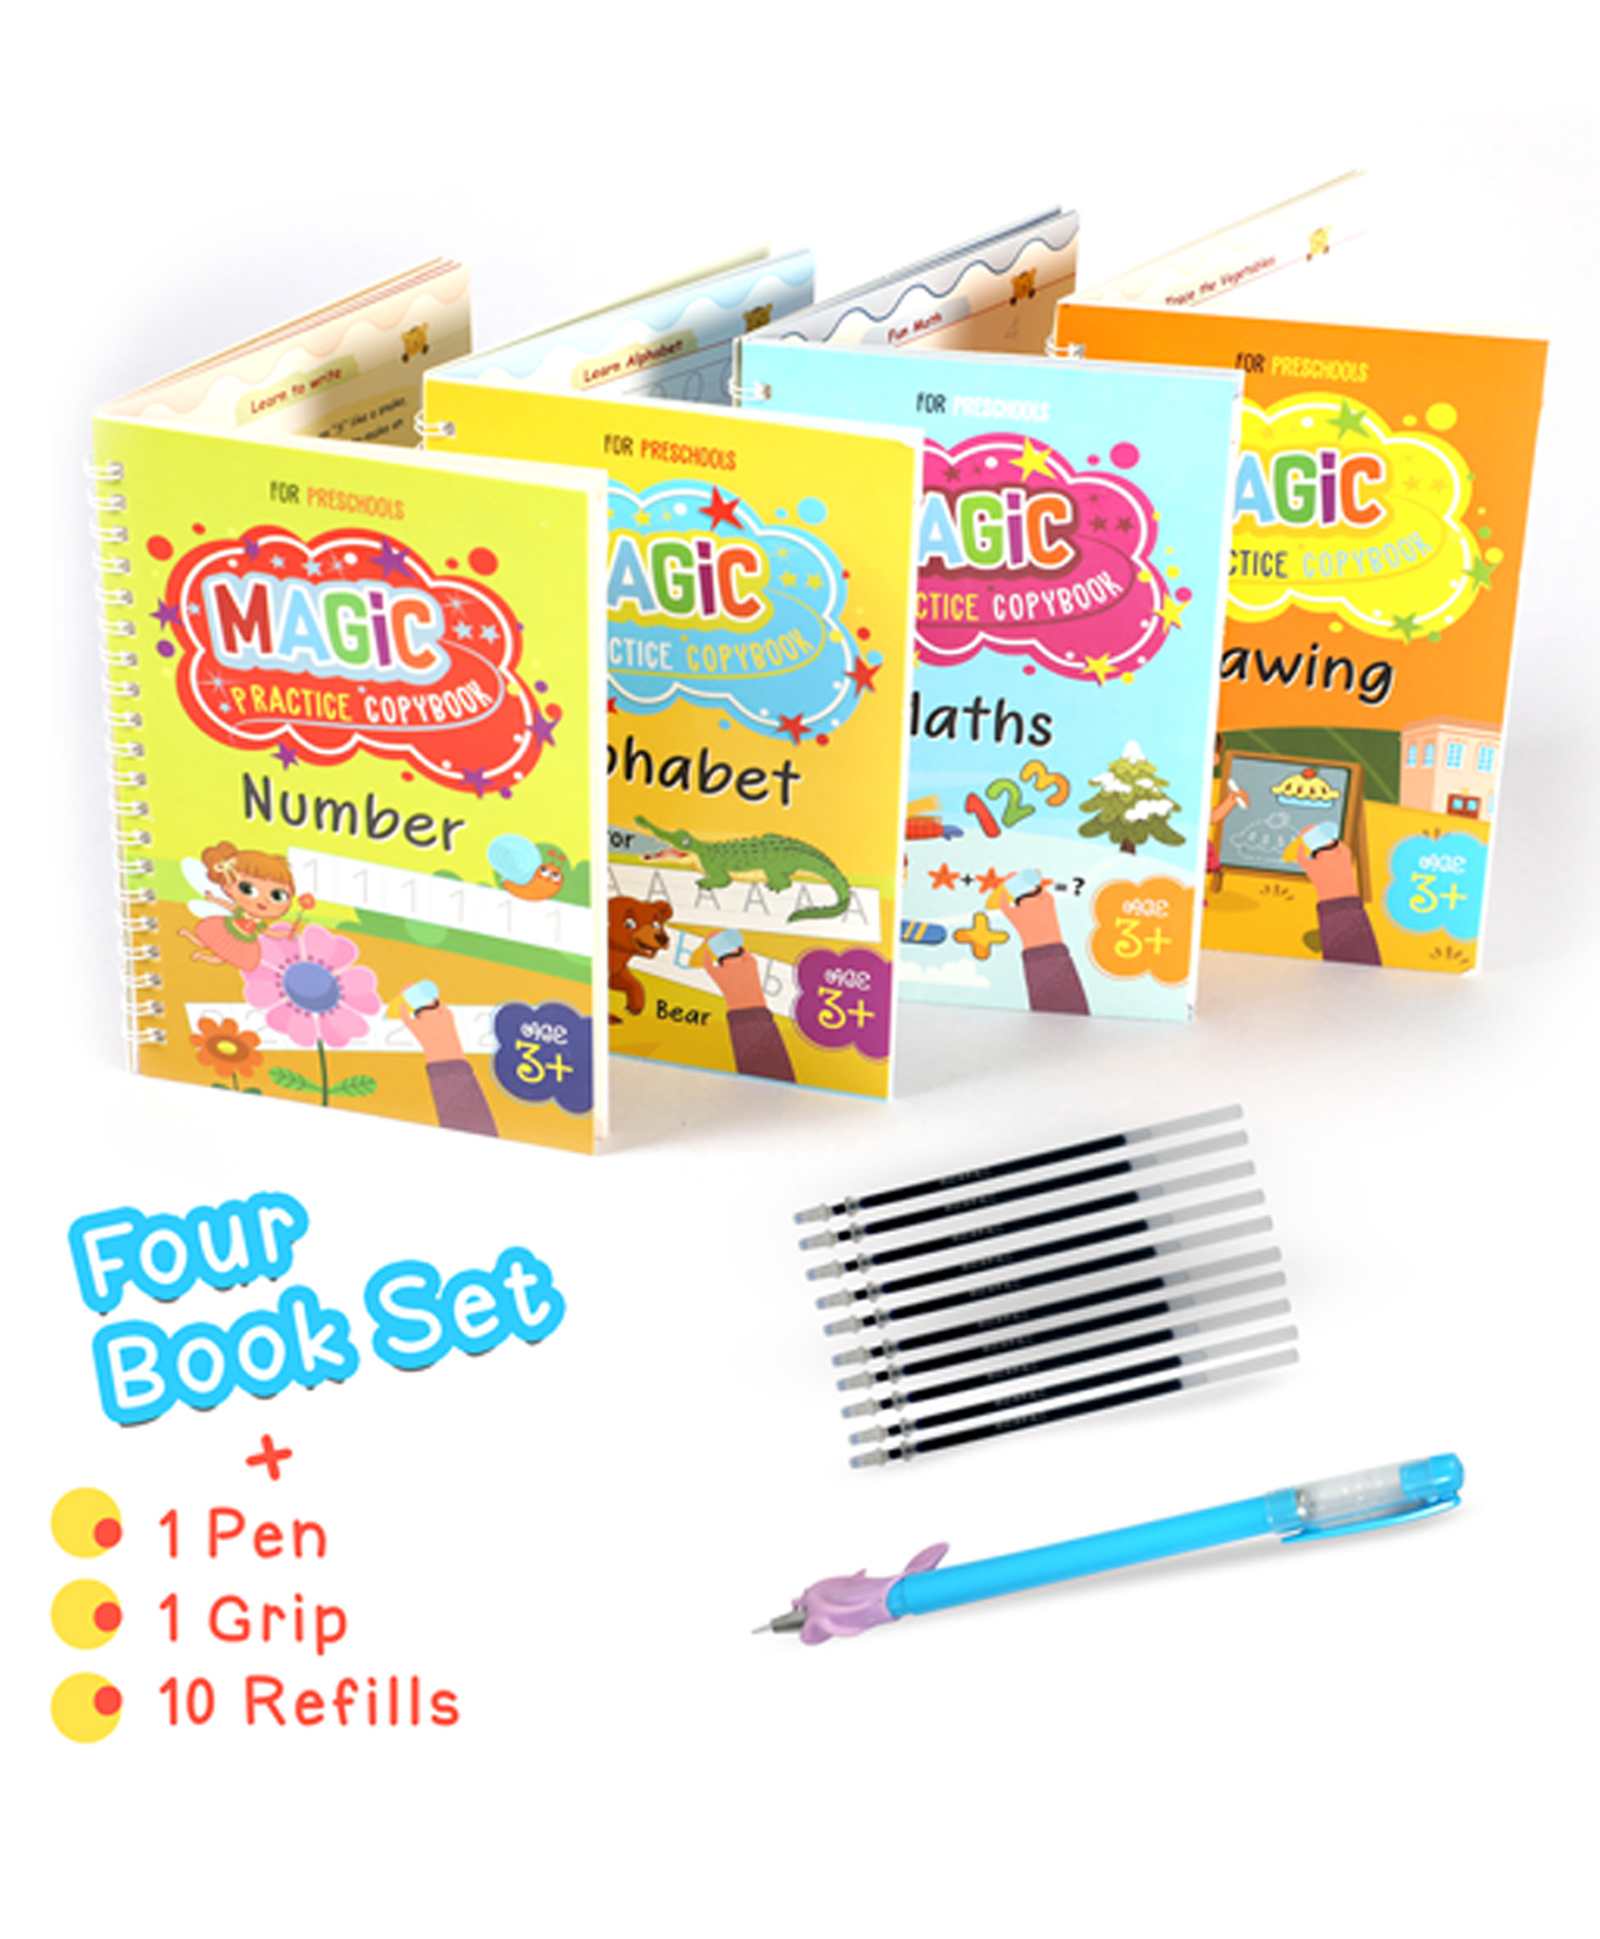 Grips and Refills for Groove Tracing Magic Practice Copybook for Kids Plus Star Reward Stickers 4 English Reusable Book Set for Handwriting Practice with Magic Ink Writing Pens 